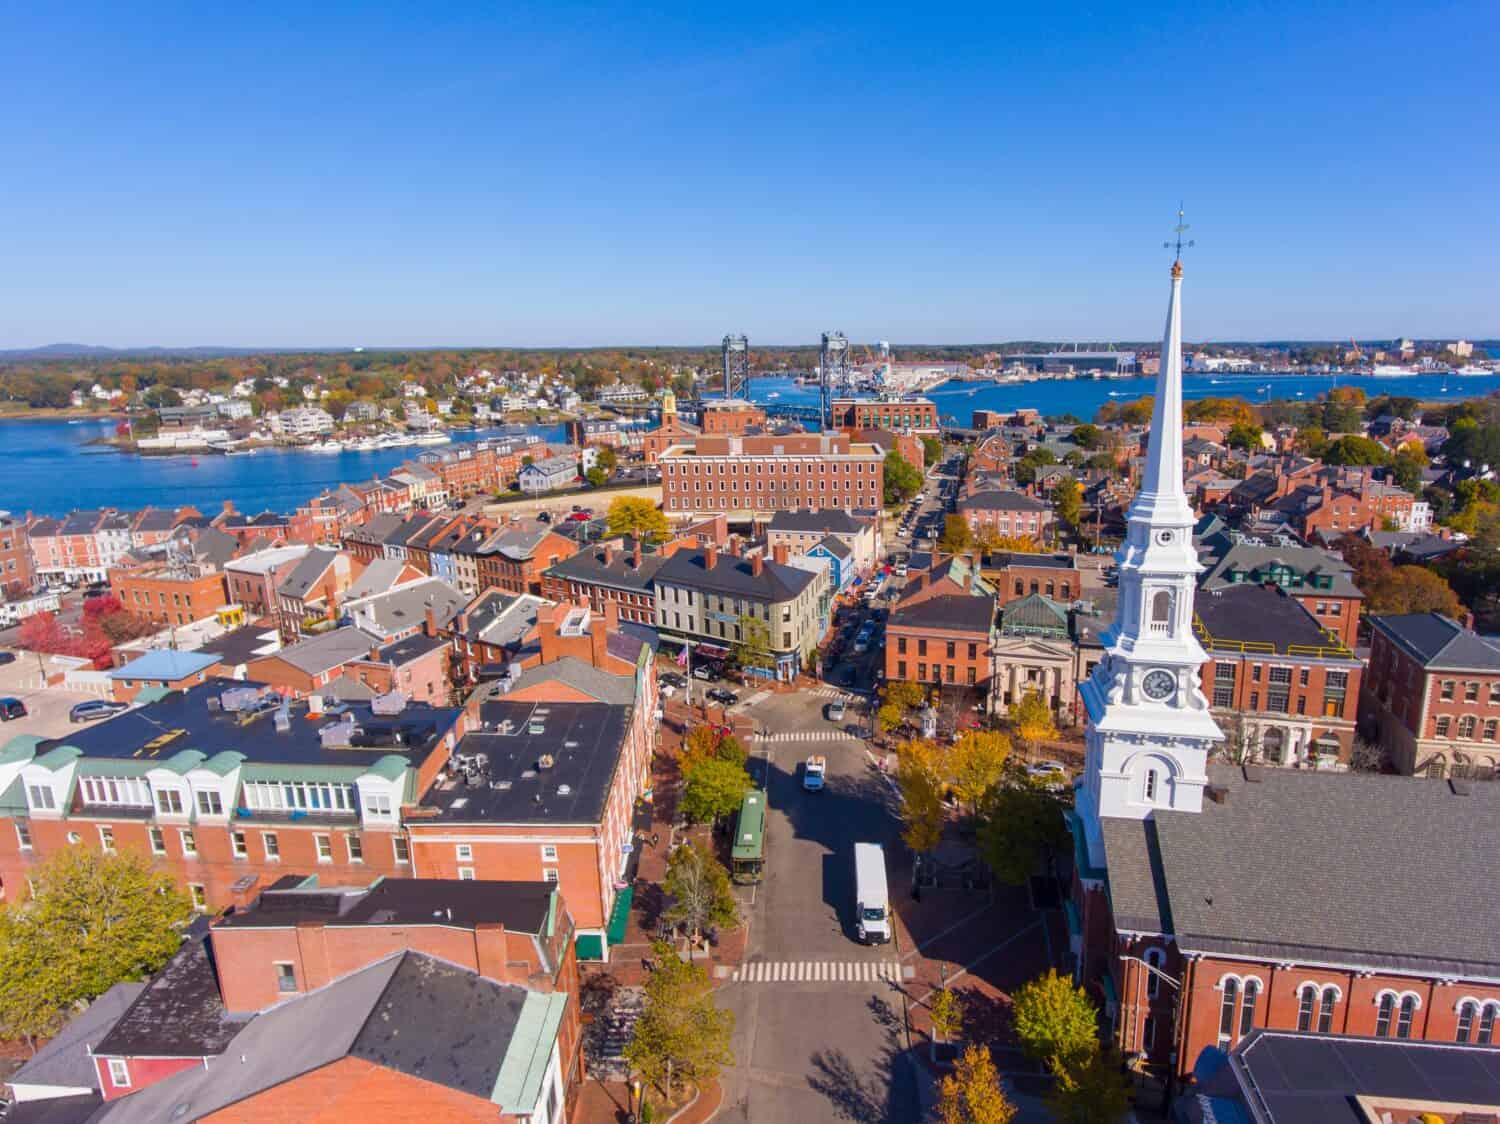 Portsmouth historic downtown aerial view at Market Square with historic buildings and North Church on Congress Street in city of Portsmouth, New Hampshire NH, USA.